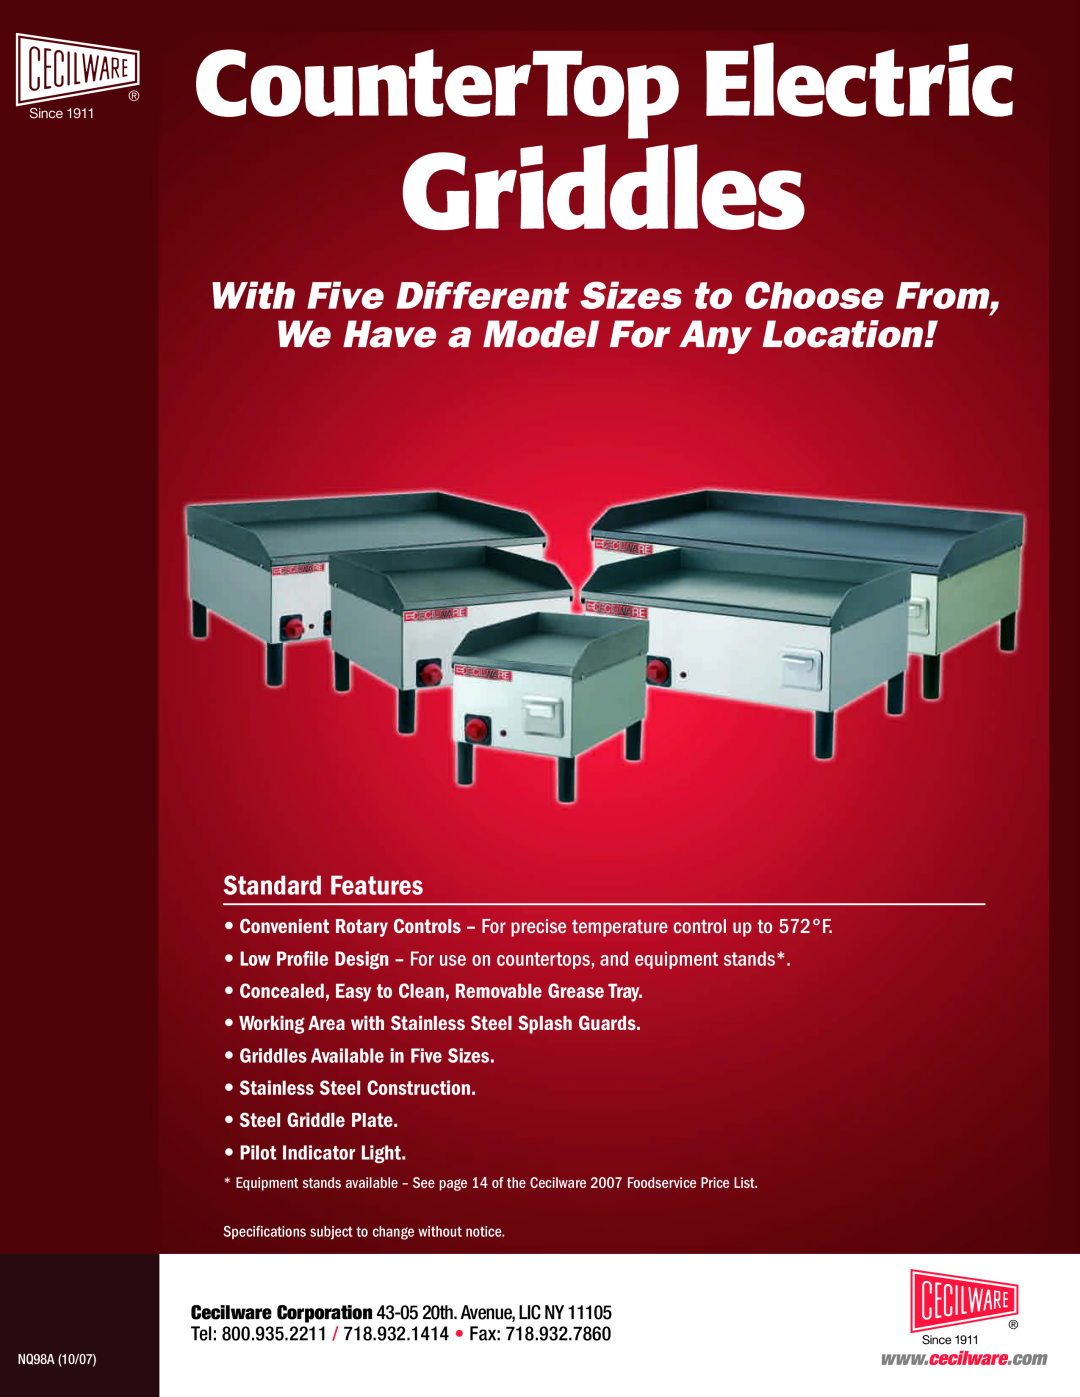 Cecilware NQ98A specifications Griddles, Since 1911 CounterTop Electric, With Five Different Sizes to Choose From 